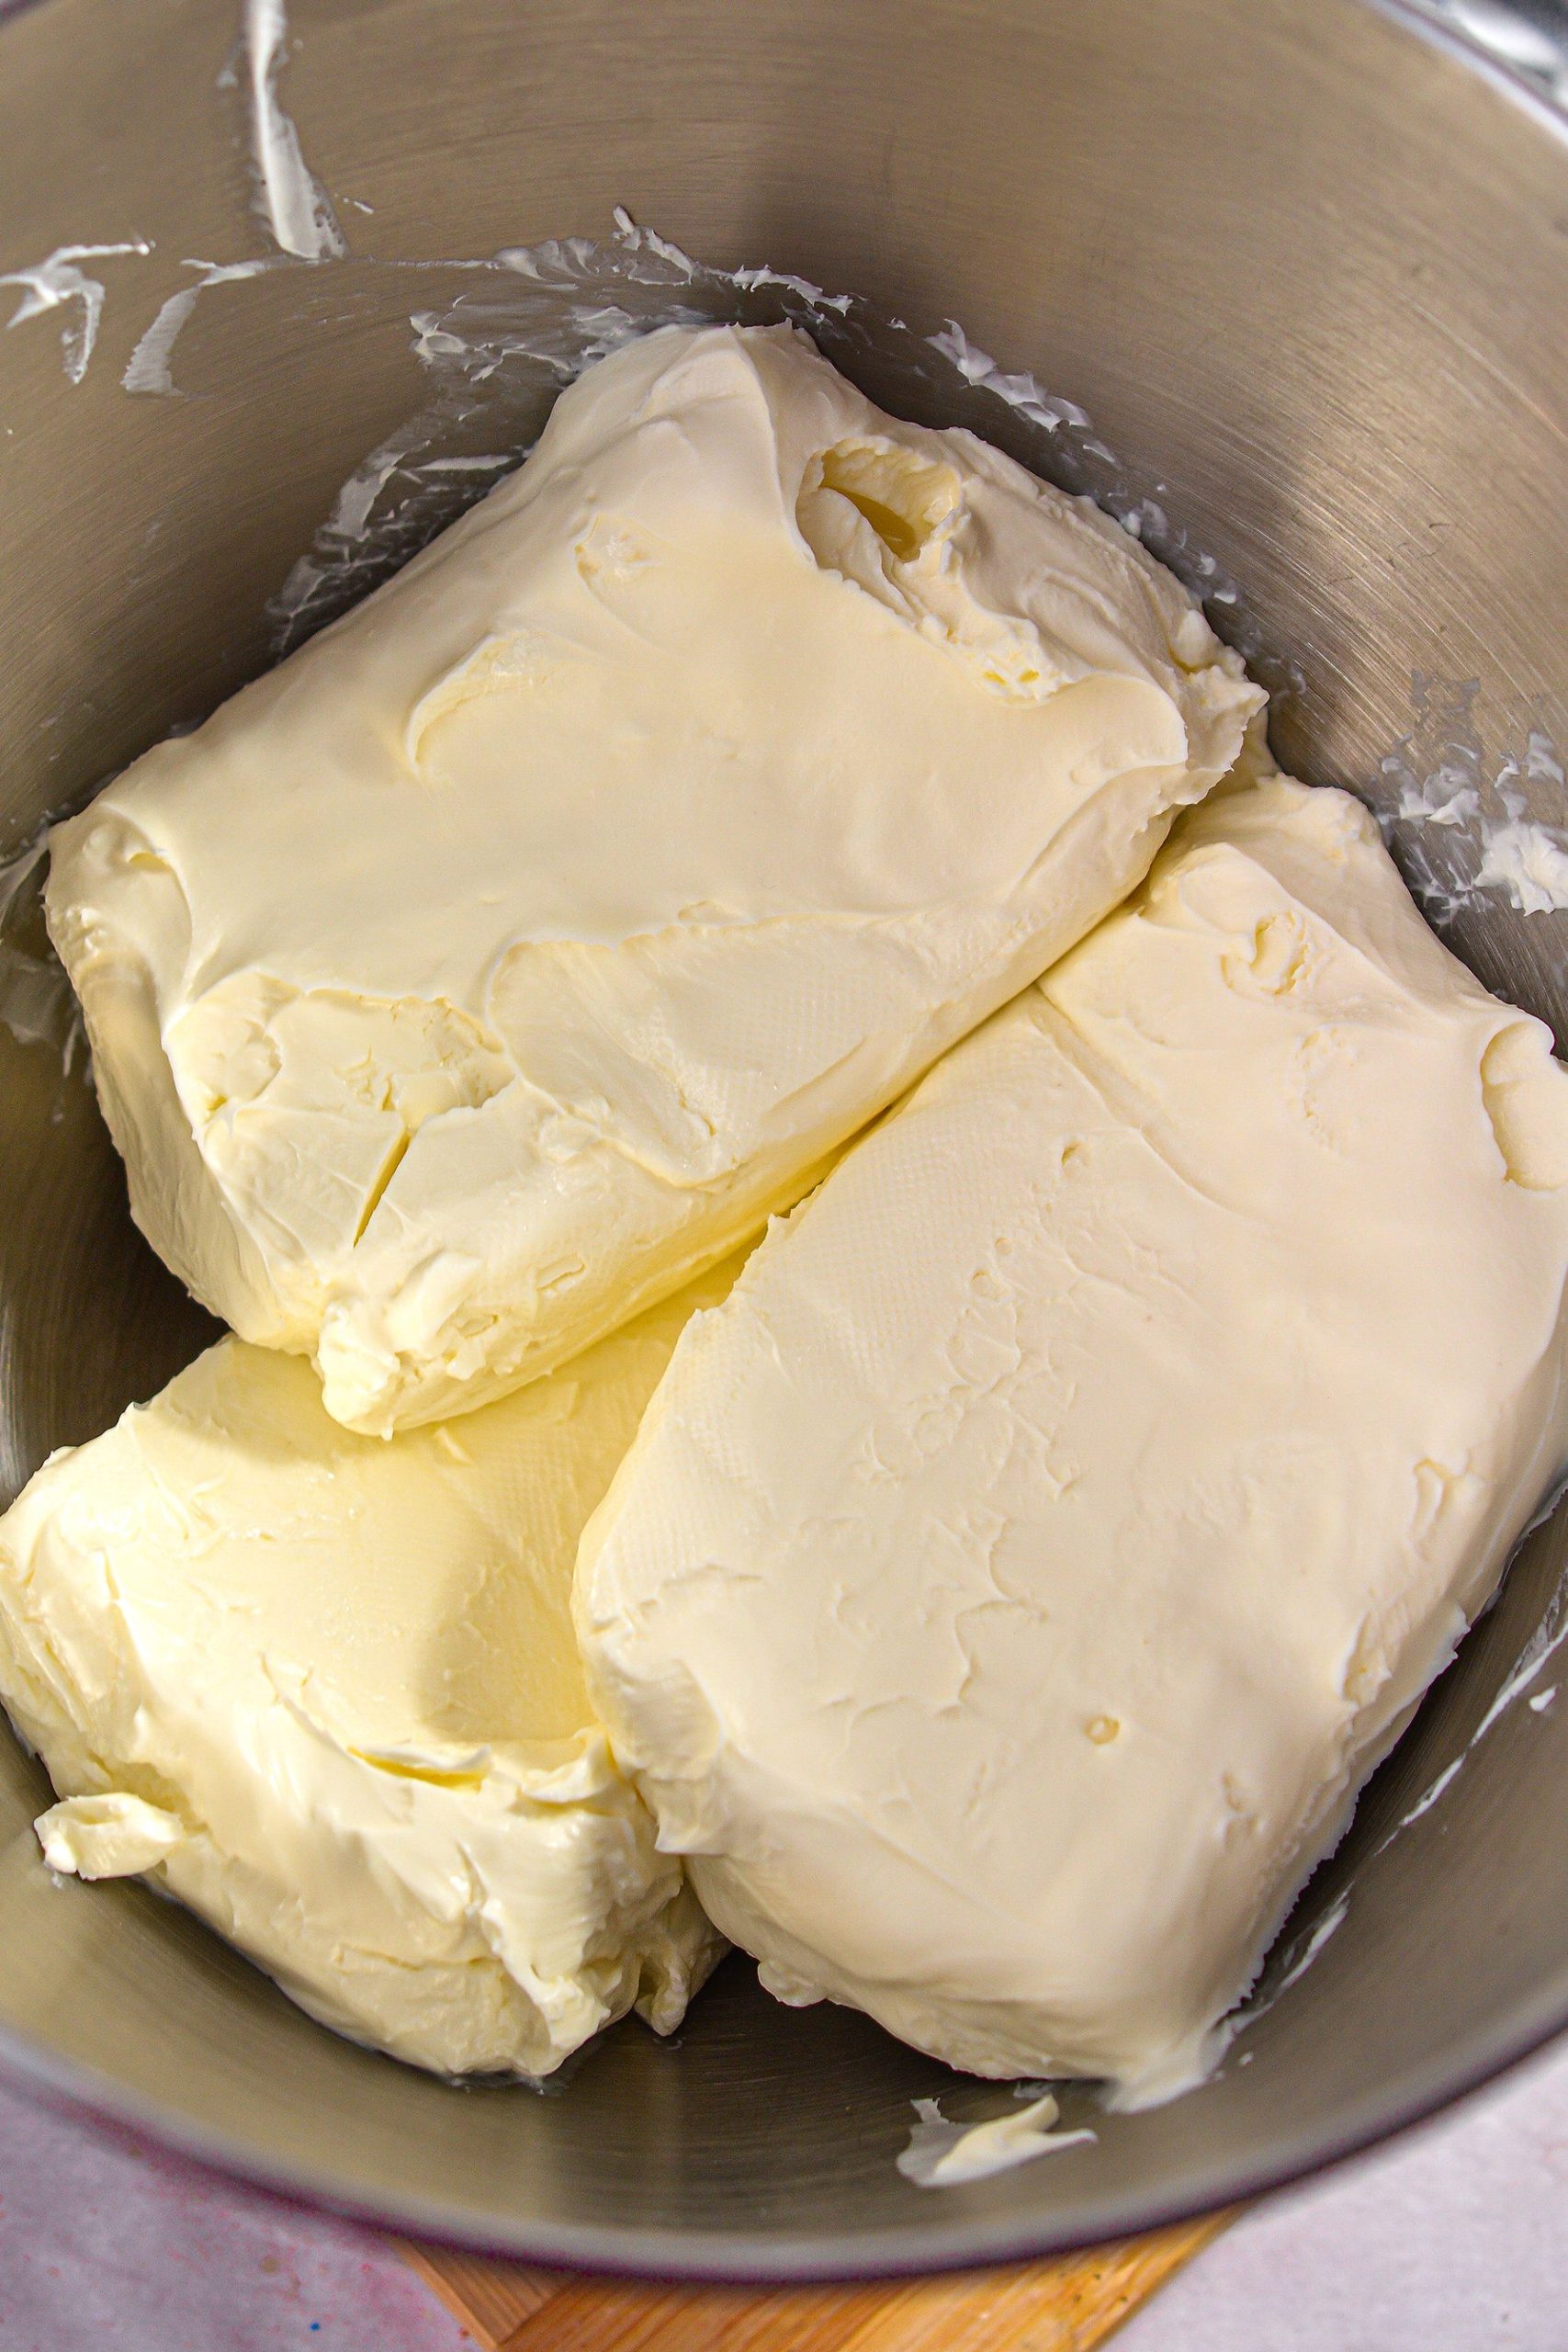 In a mixing bowl, beat together the cream cheese and the 1 cup sugar until smooth and fluffy.